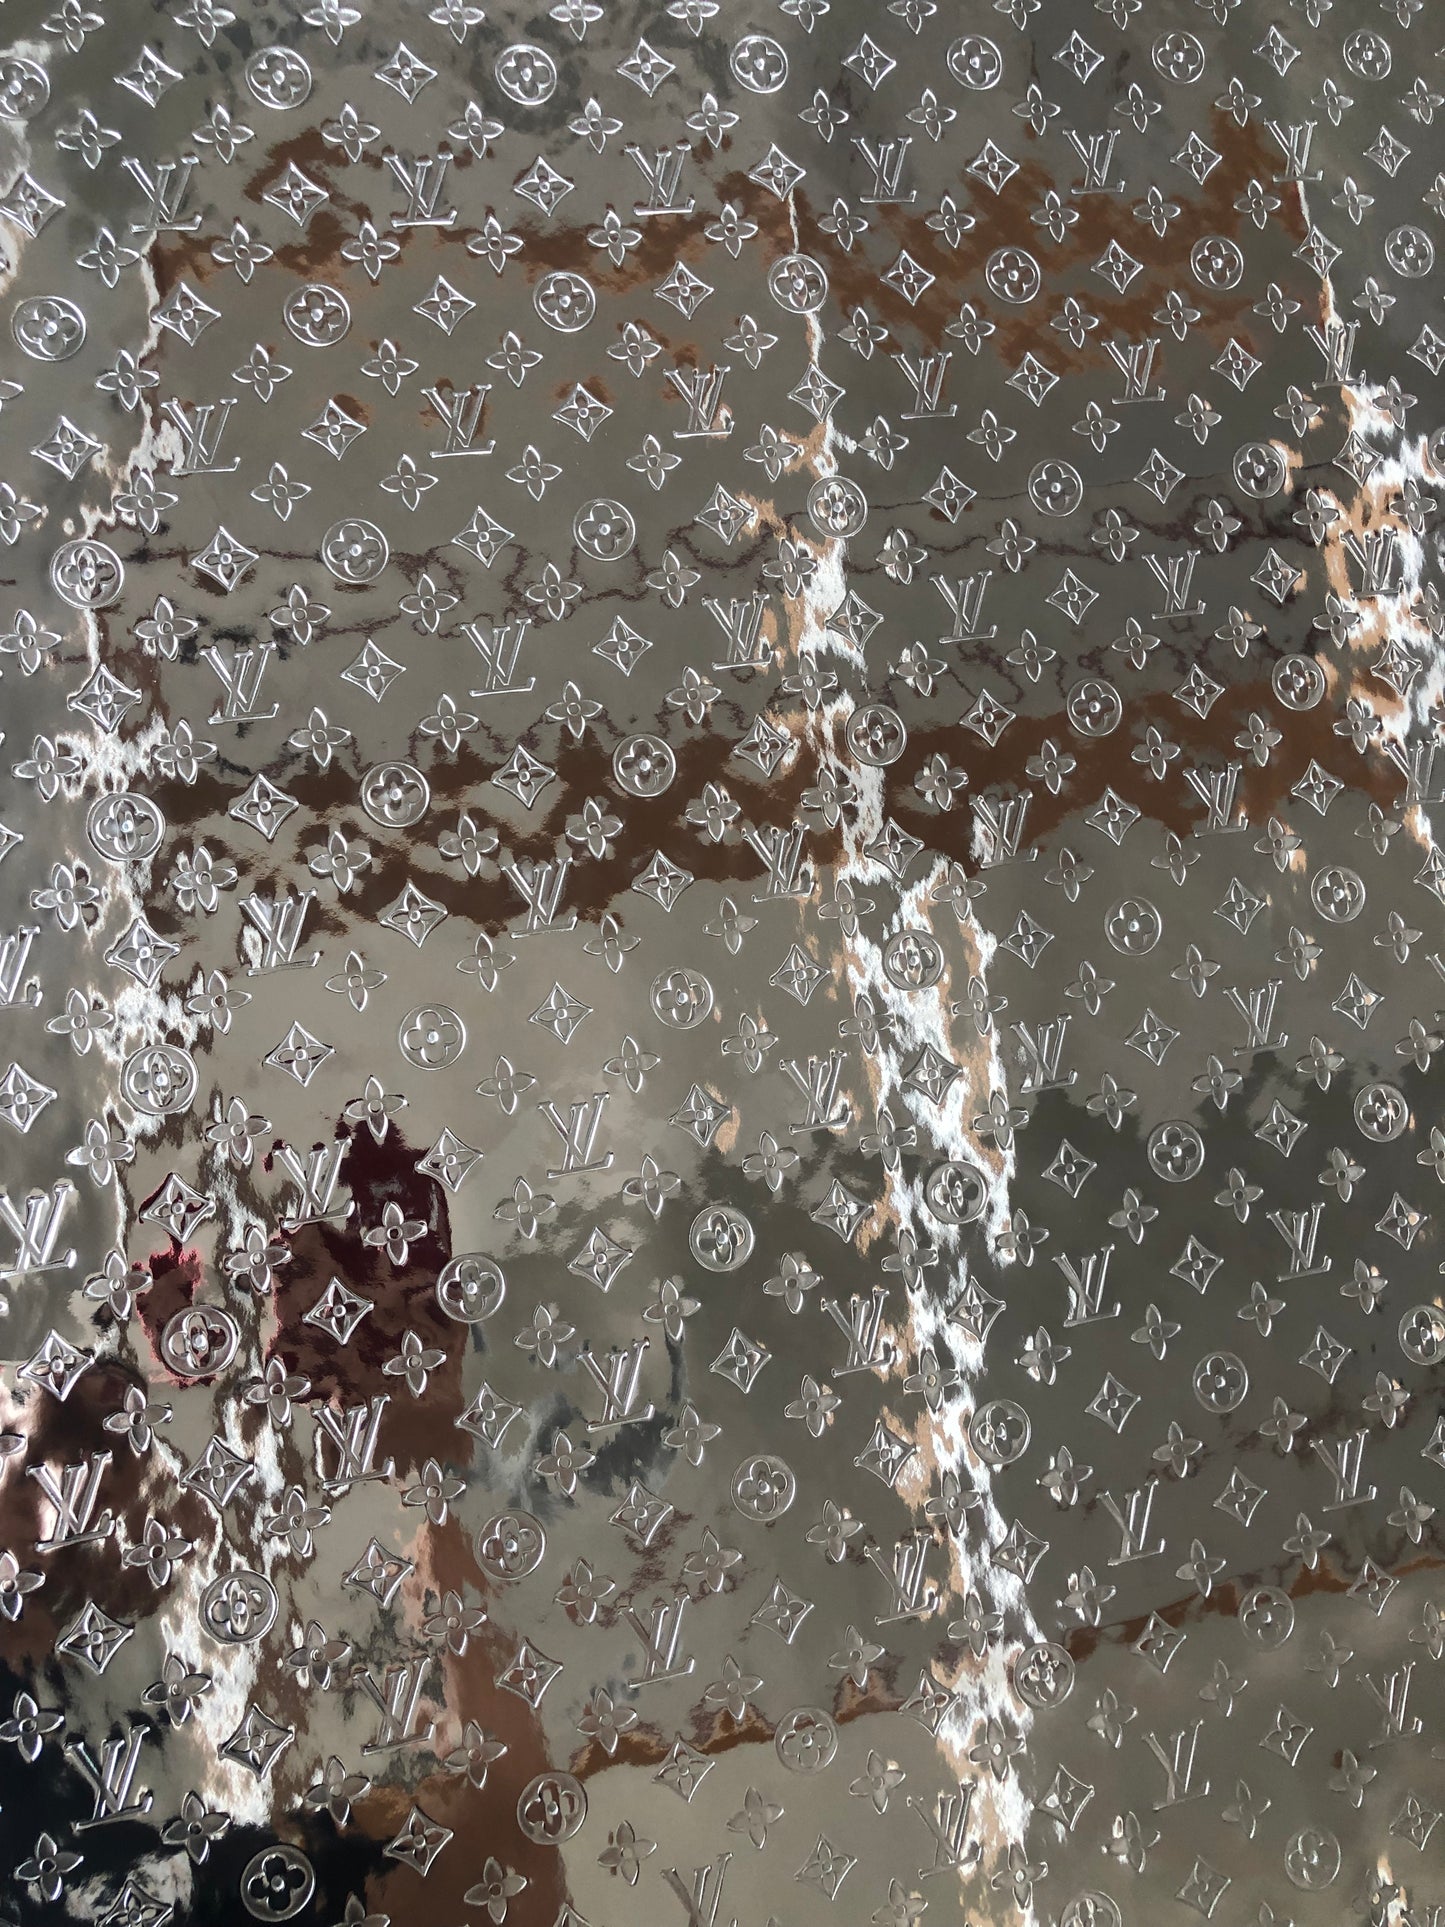 Beautiful Shiny Silver Reflective LV Leather for Custom Bag Crafting